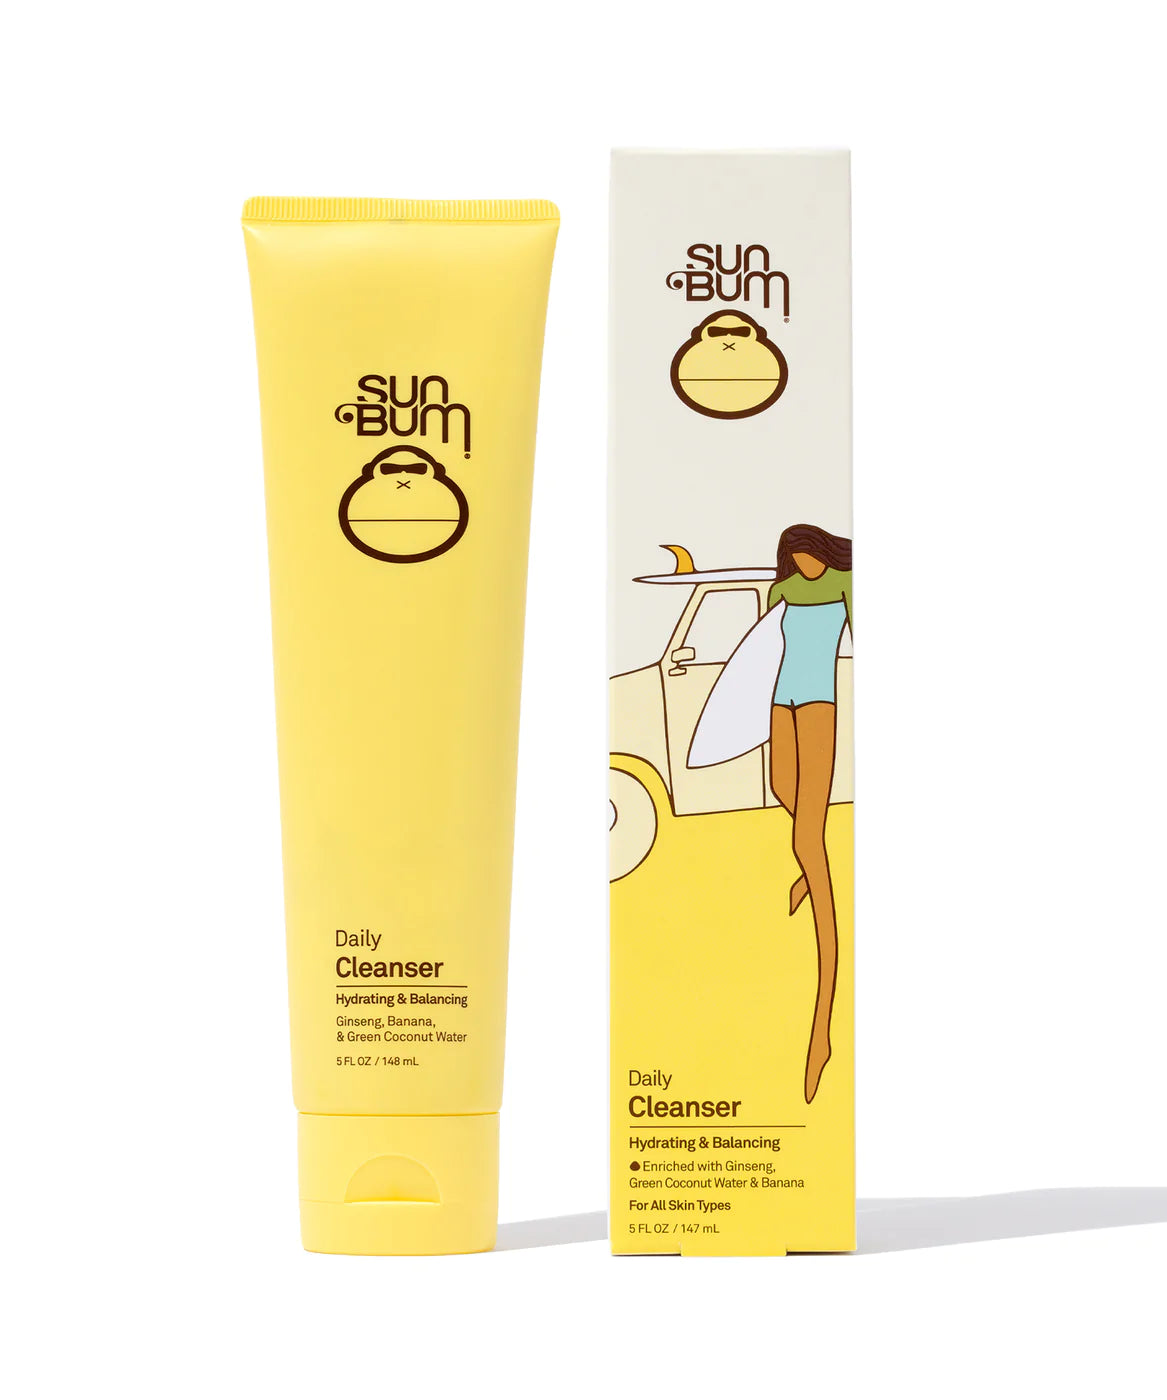 SUN BUM DAILY CLEANSER LOTION